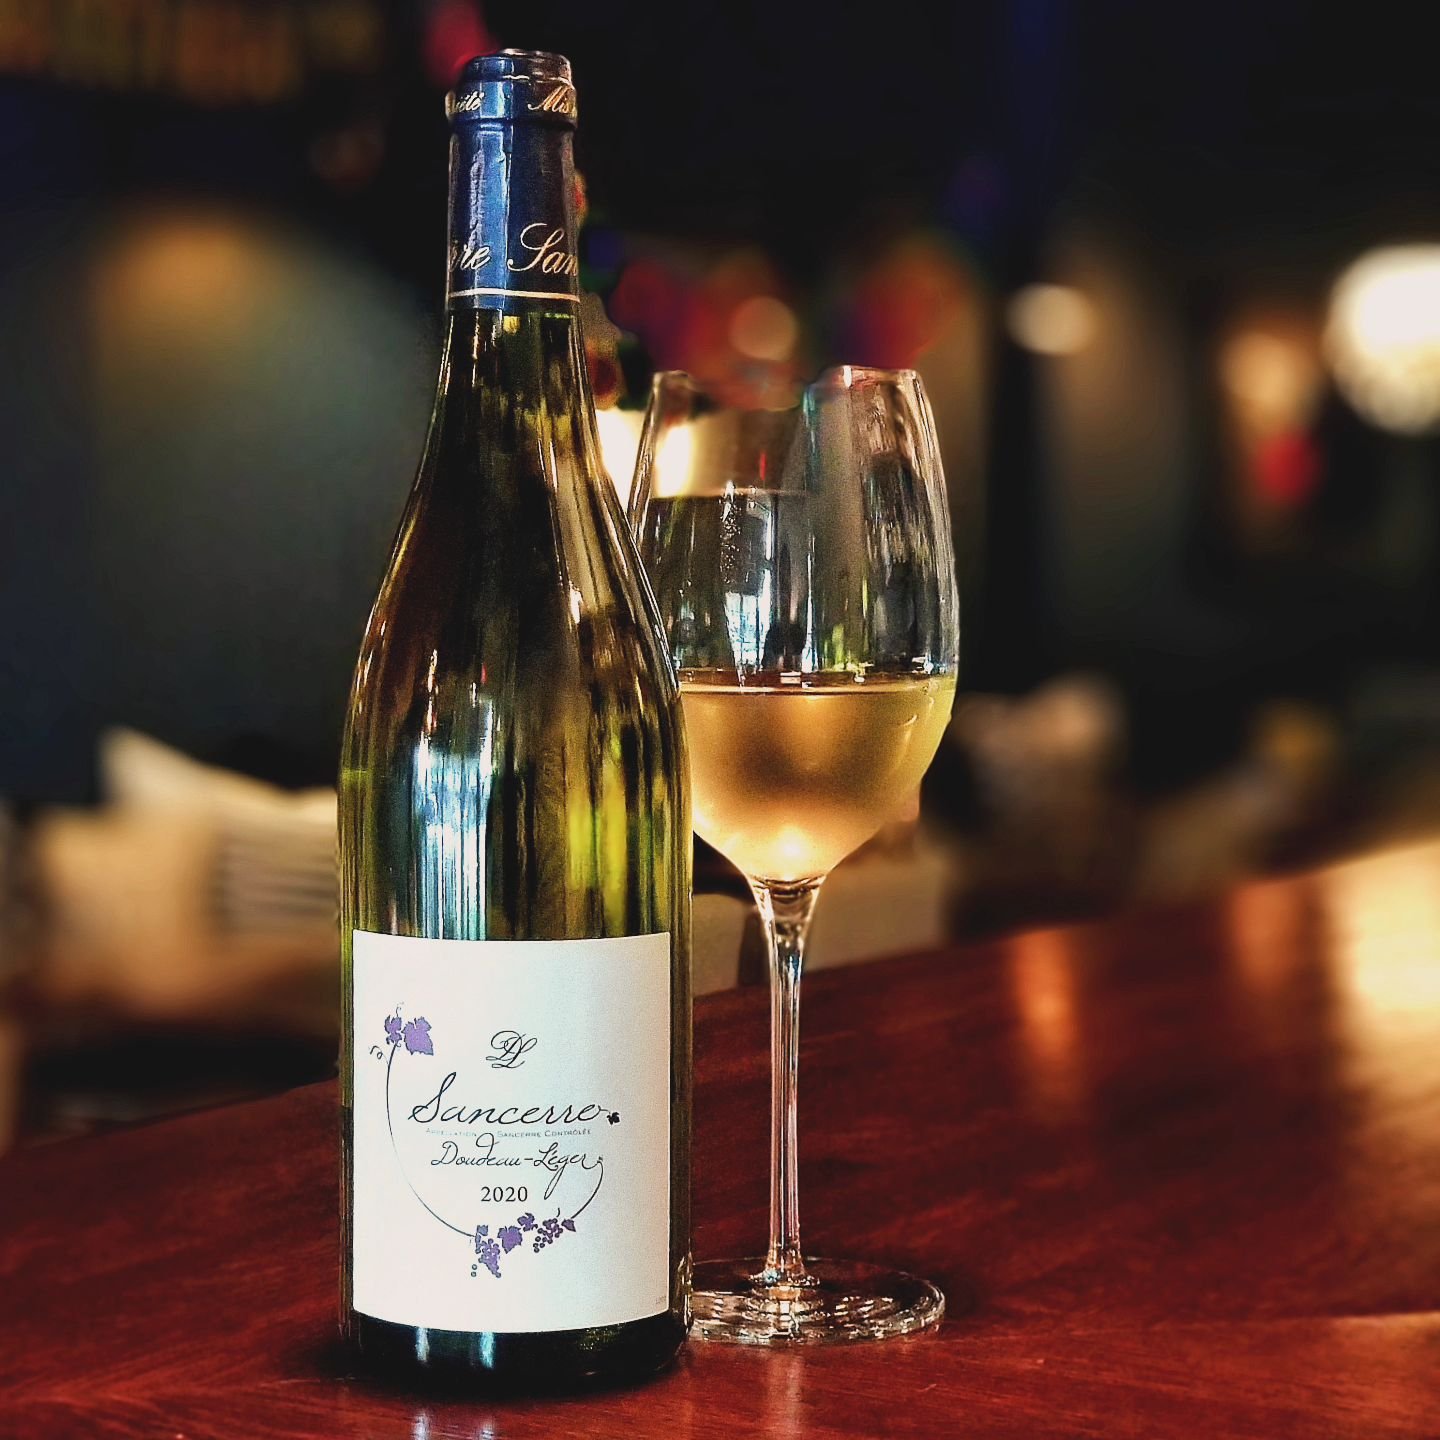 It's International Sauvignon Blanc Day! Planted world-wide, this grape produces beautiful single varietal wines but, it is also often blend to produce more complex wines. 

Come visit us today to tast the glorious grape by the glass or bybthe bottle!